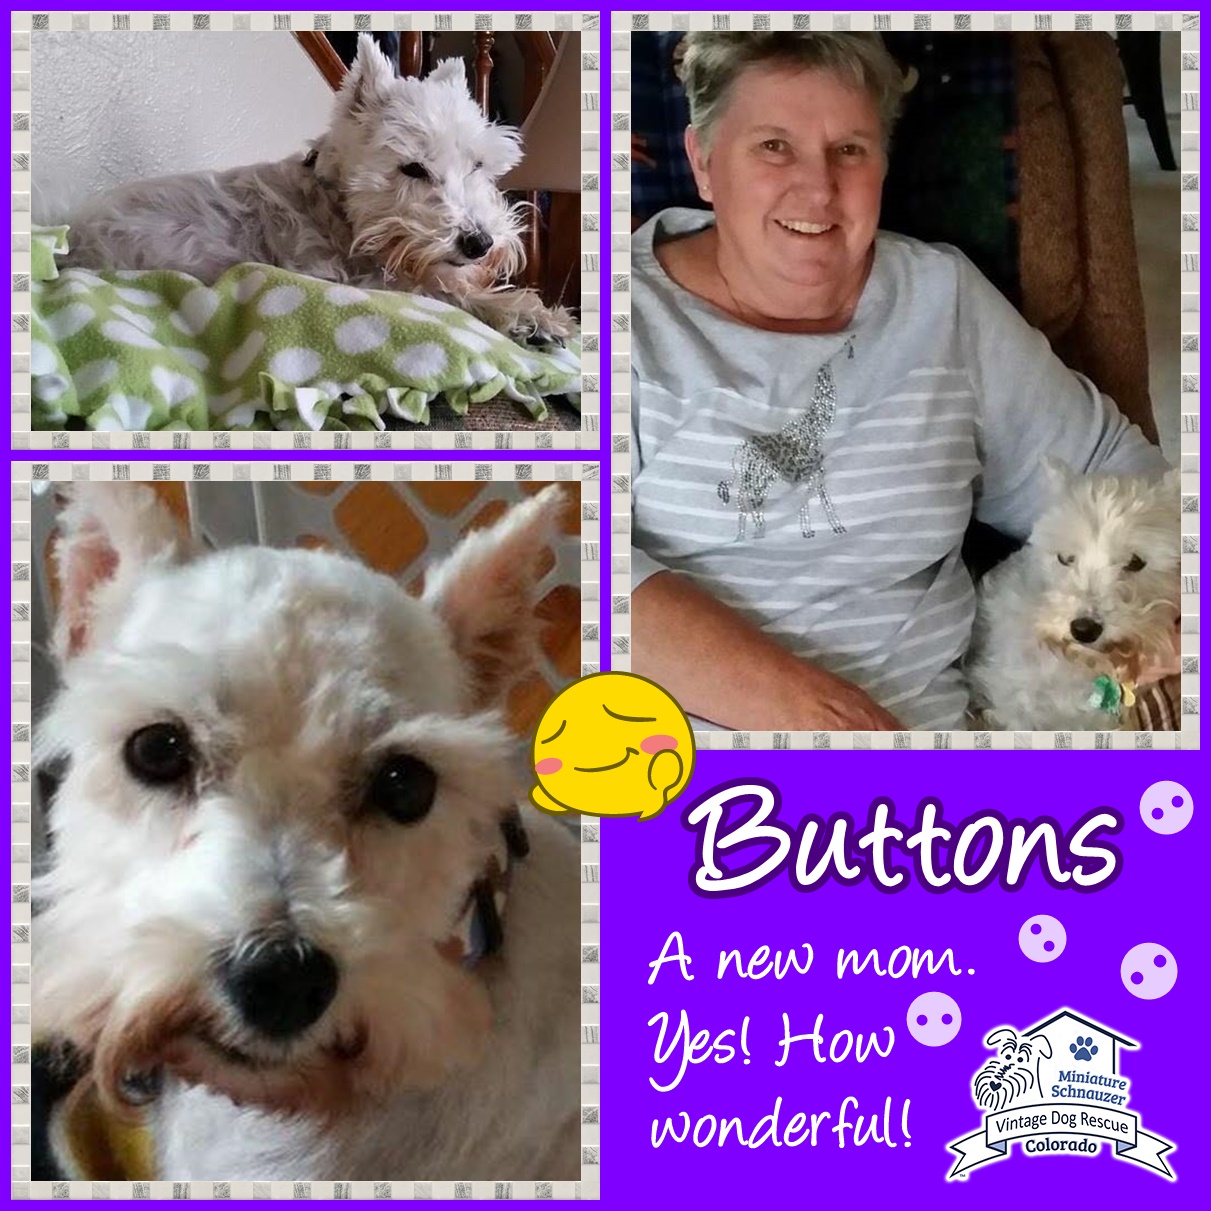 Buttons (Mini Schnauzer adopted)